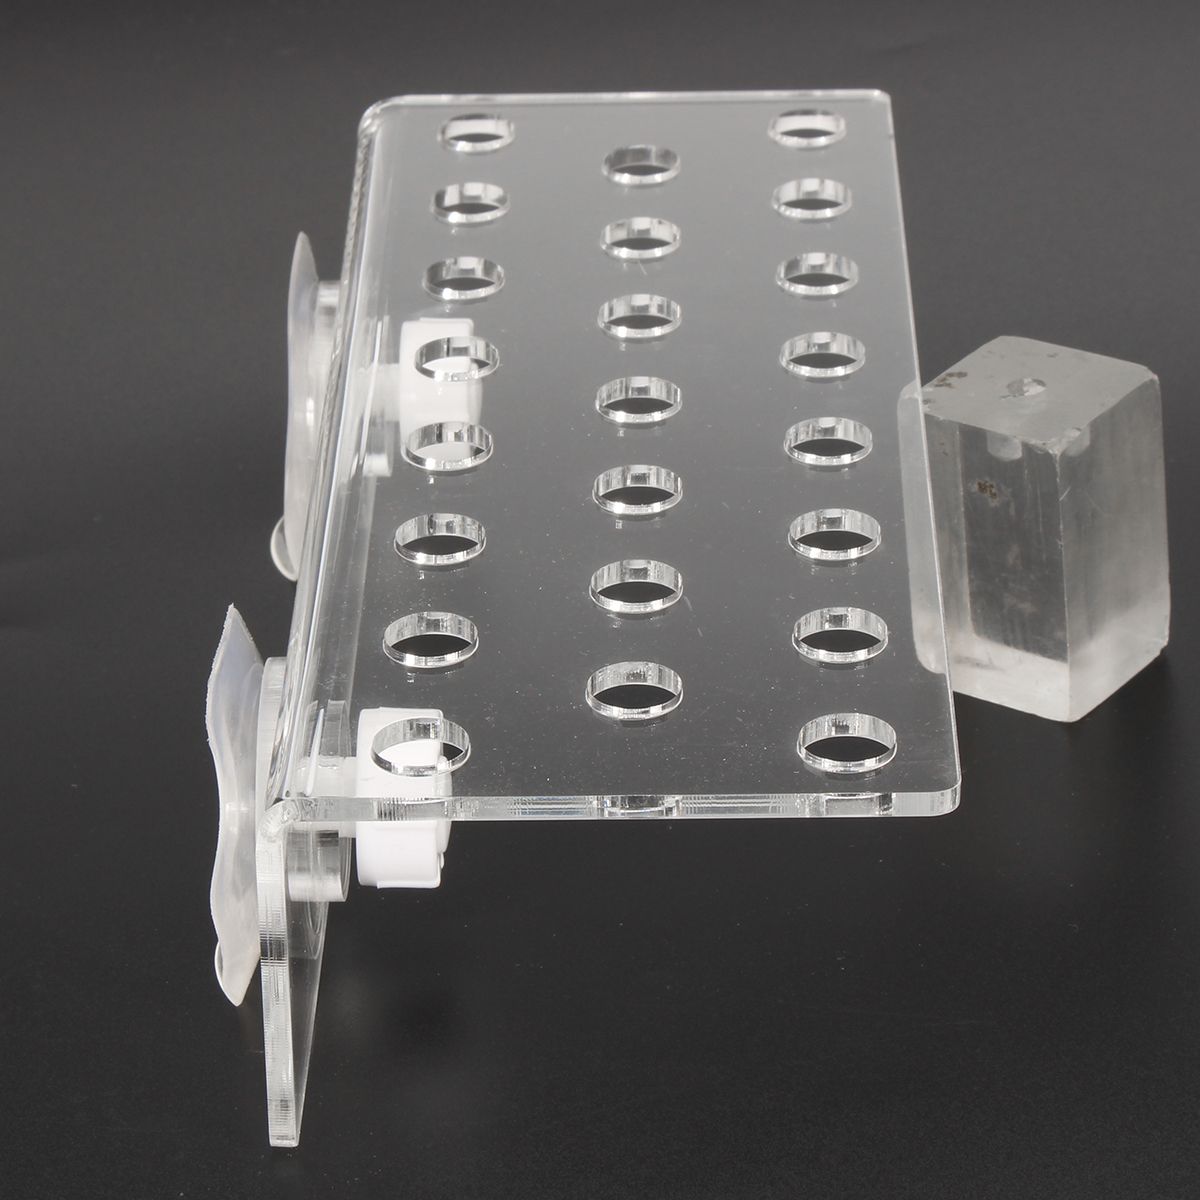 Acrylic-Aquarium-Coral-Frag-Plugs-Rack-Stand-Bracket-Holds-Live-Fish-Tank-Suction-Cup-1378420